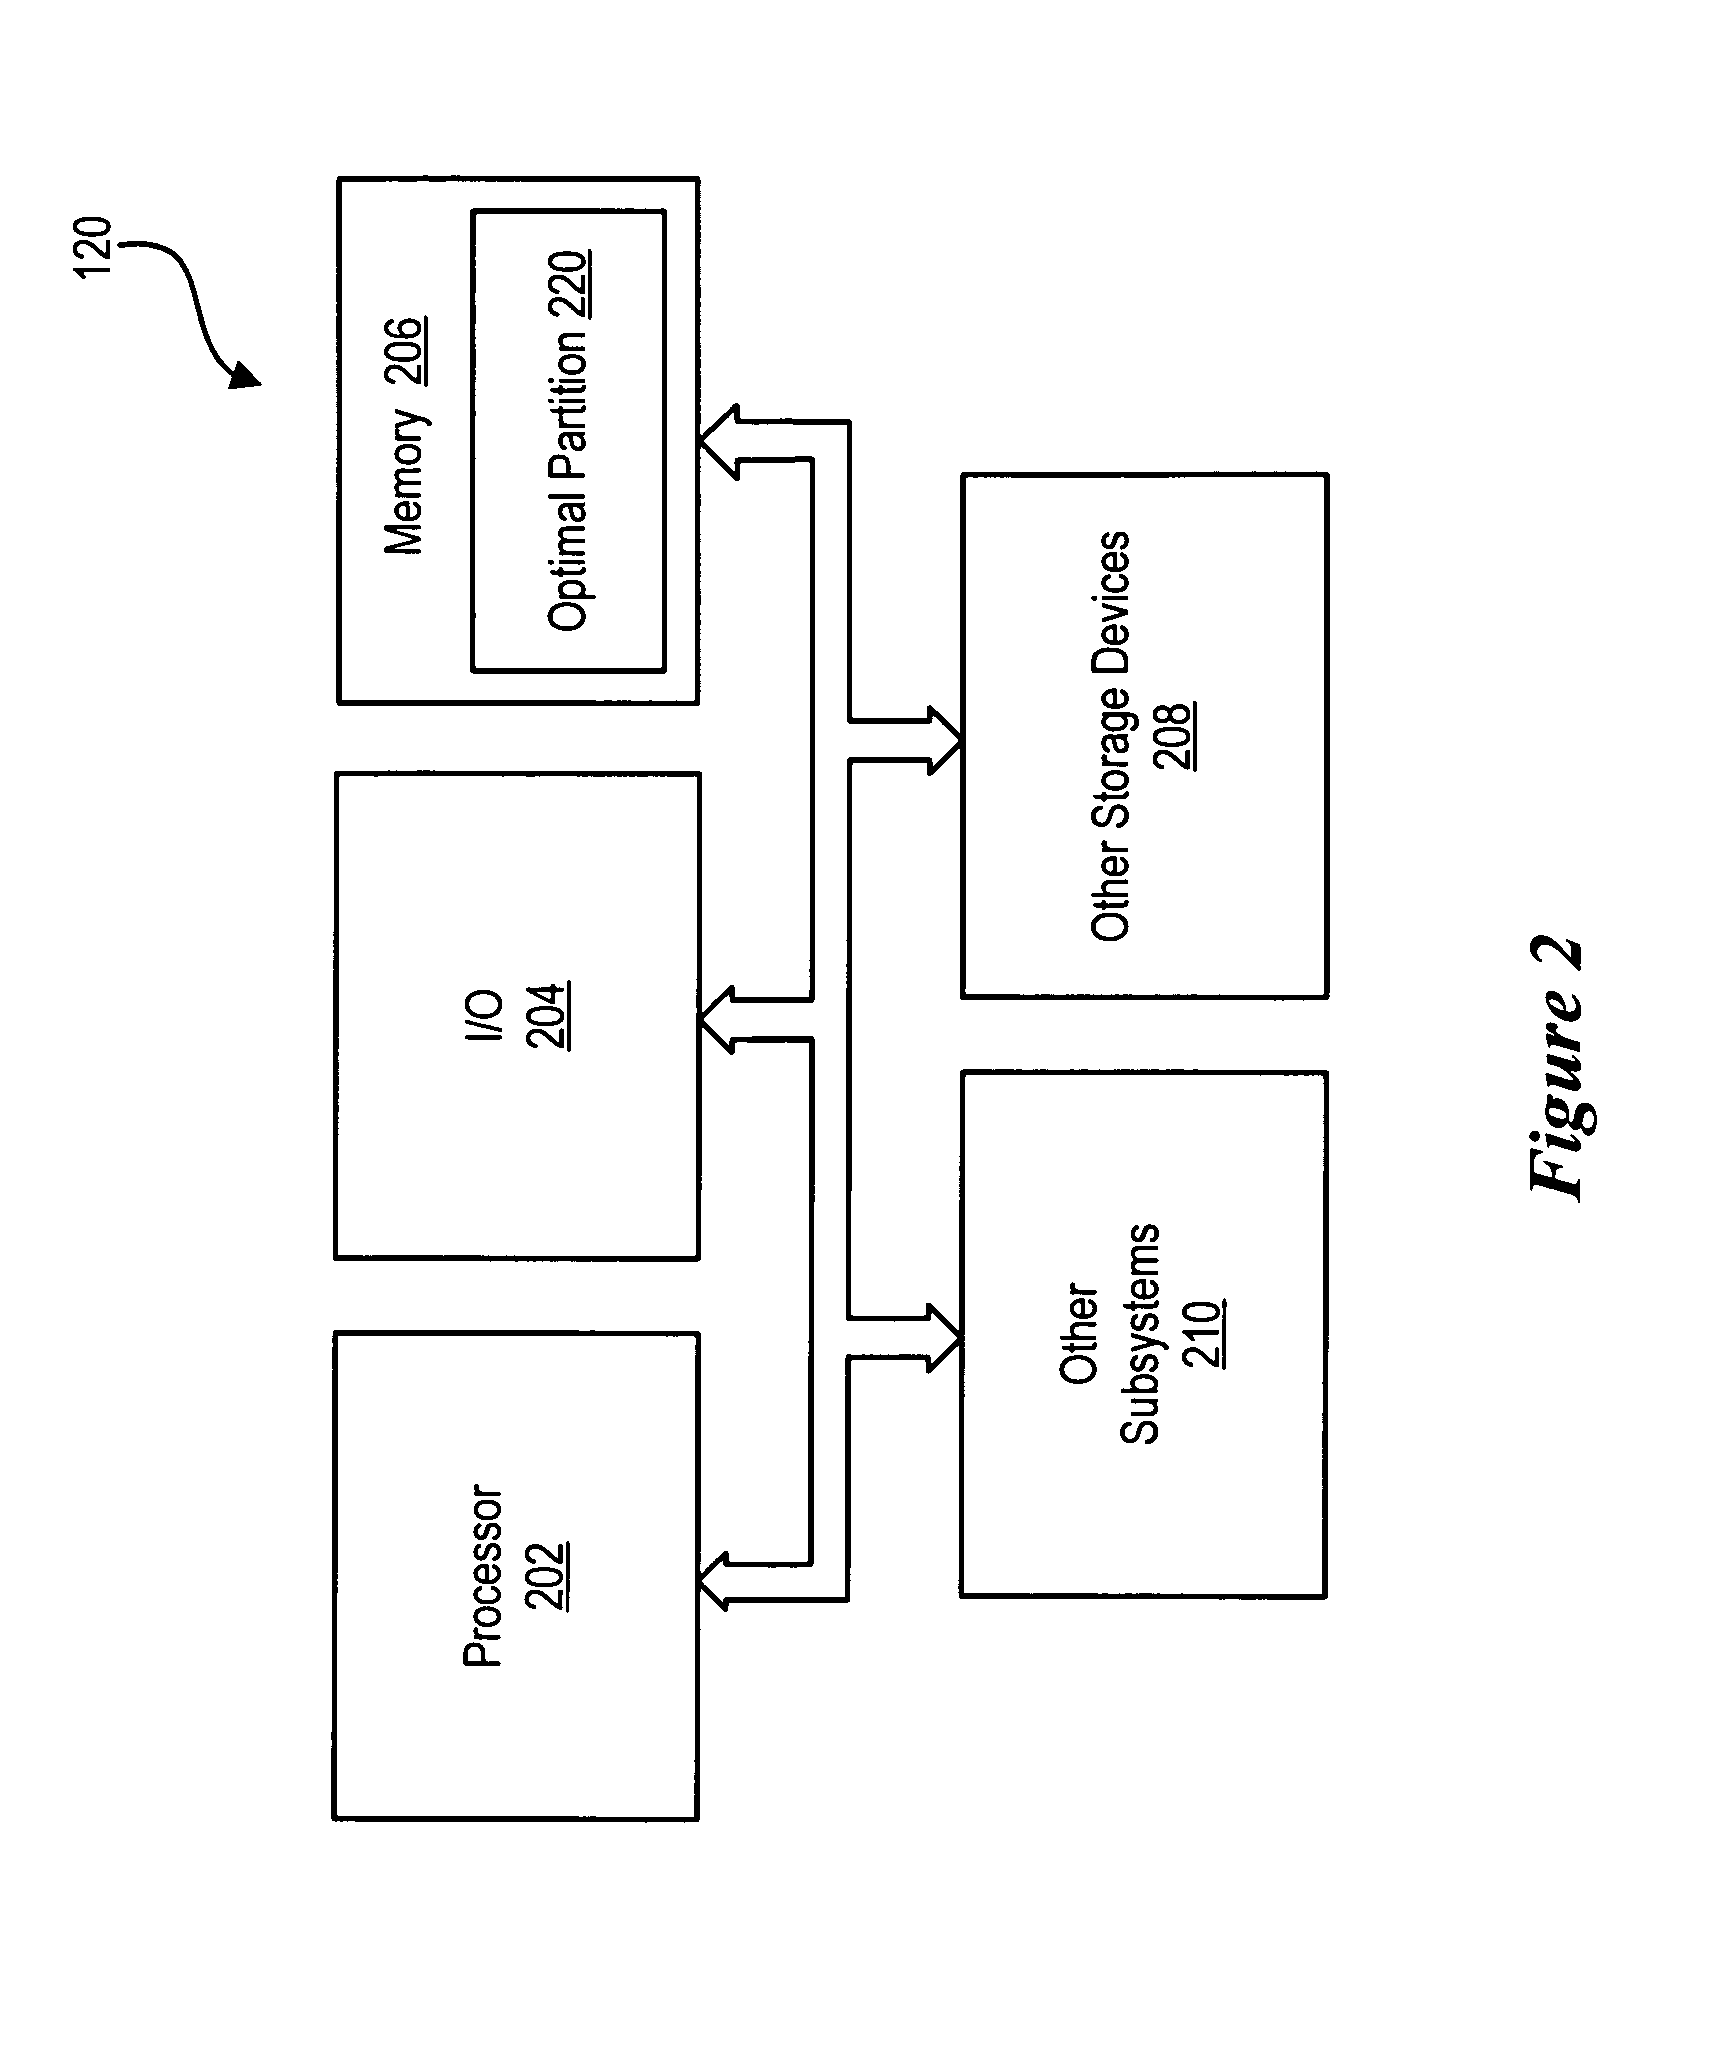 Intelligent system for determination of optimal partition size in a build to order environment